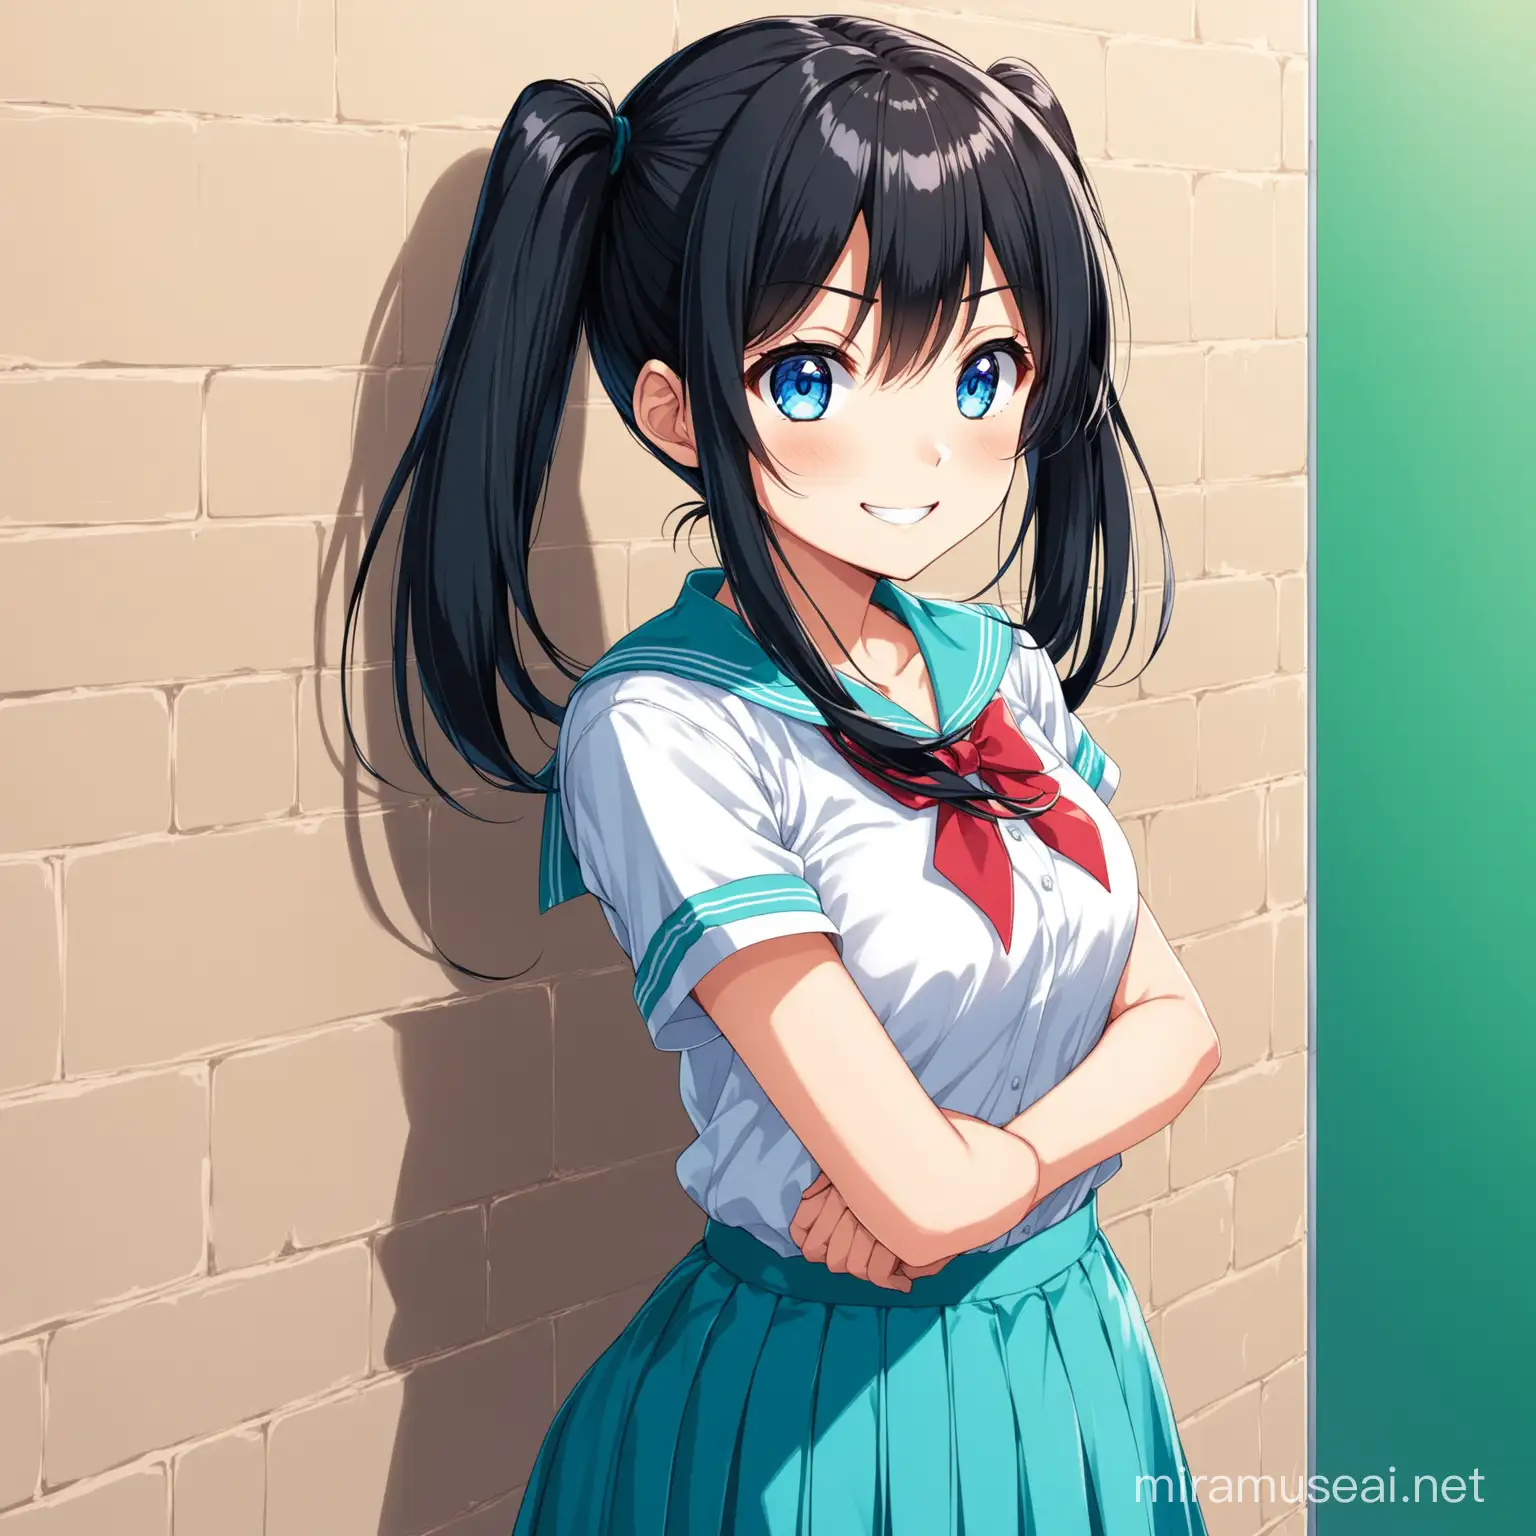 Mischievous Anime High School Girl with Black Hair Waiting by Wall